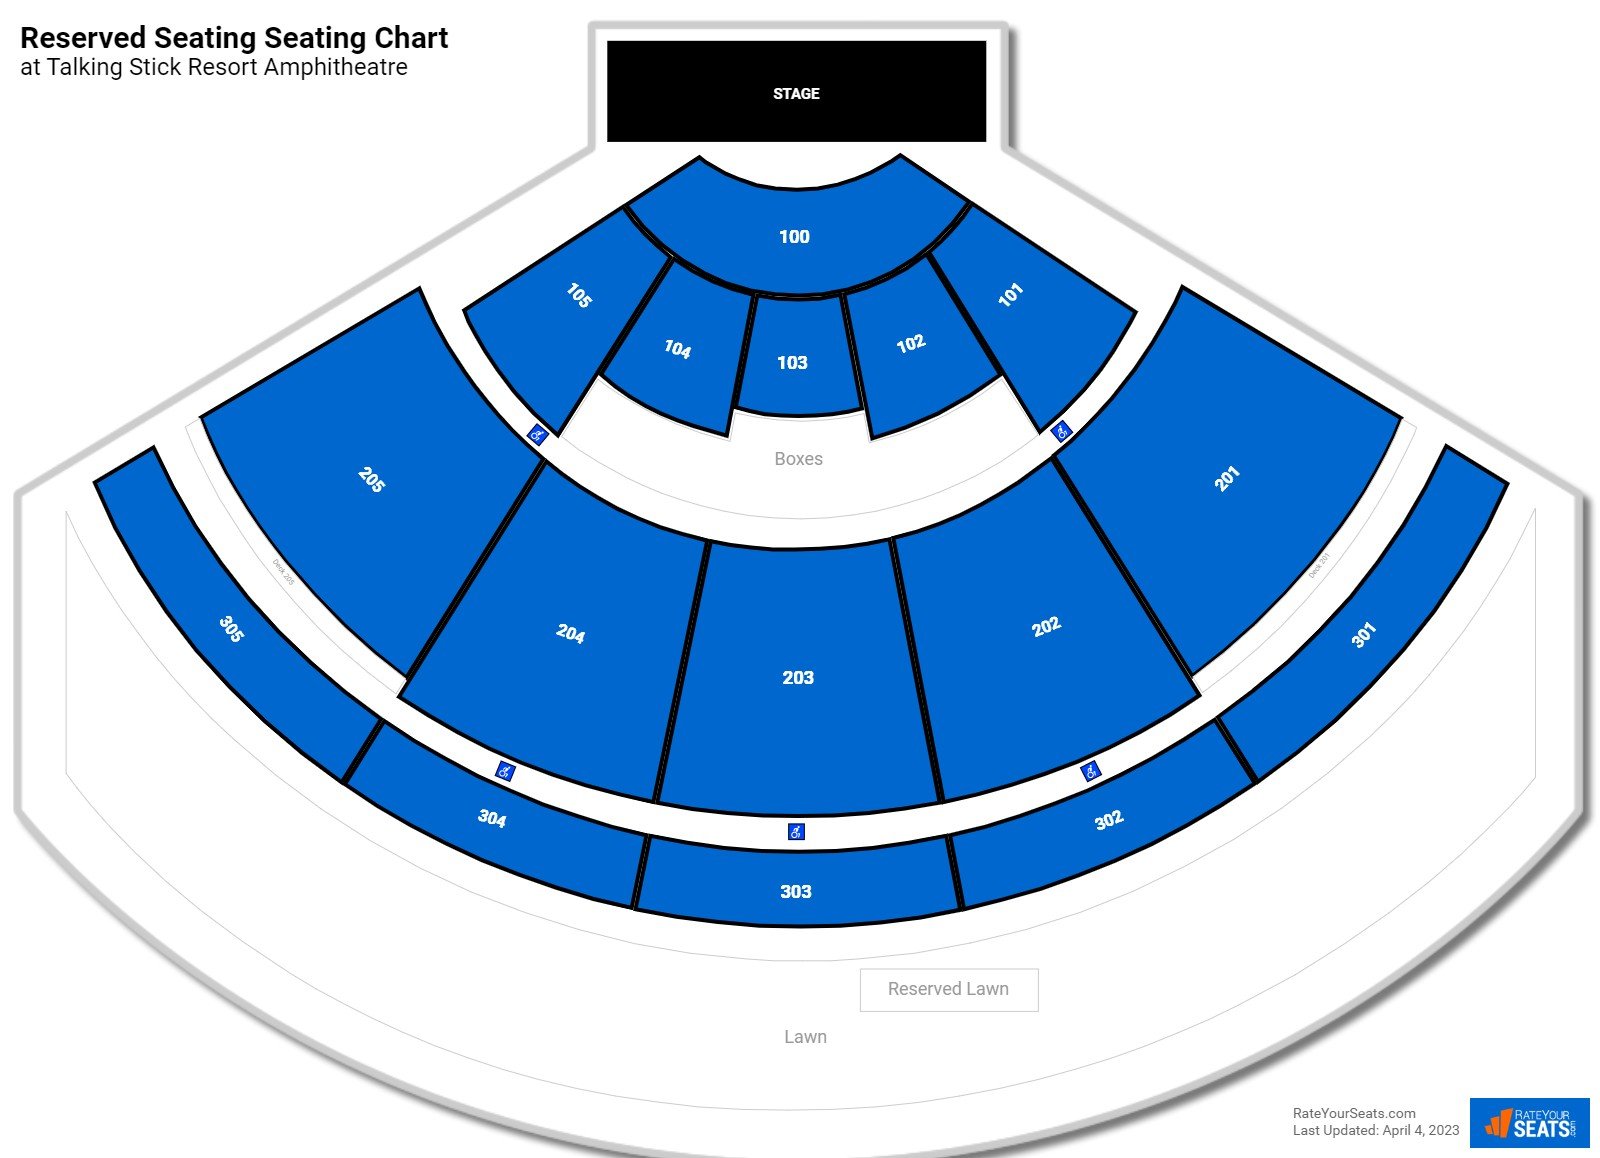 Concert Reserved Seating Seating Chart at Talking Stick Resort Amphitheatre